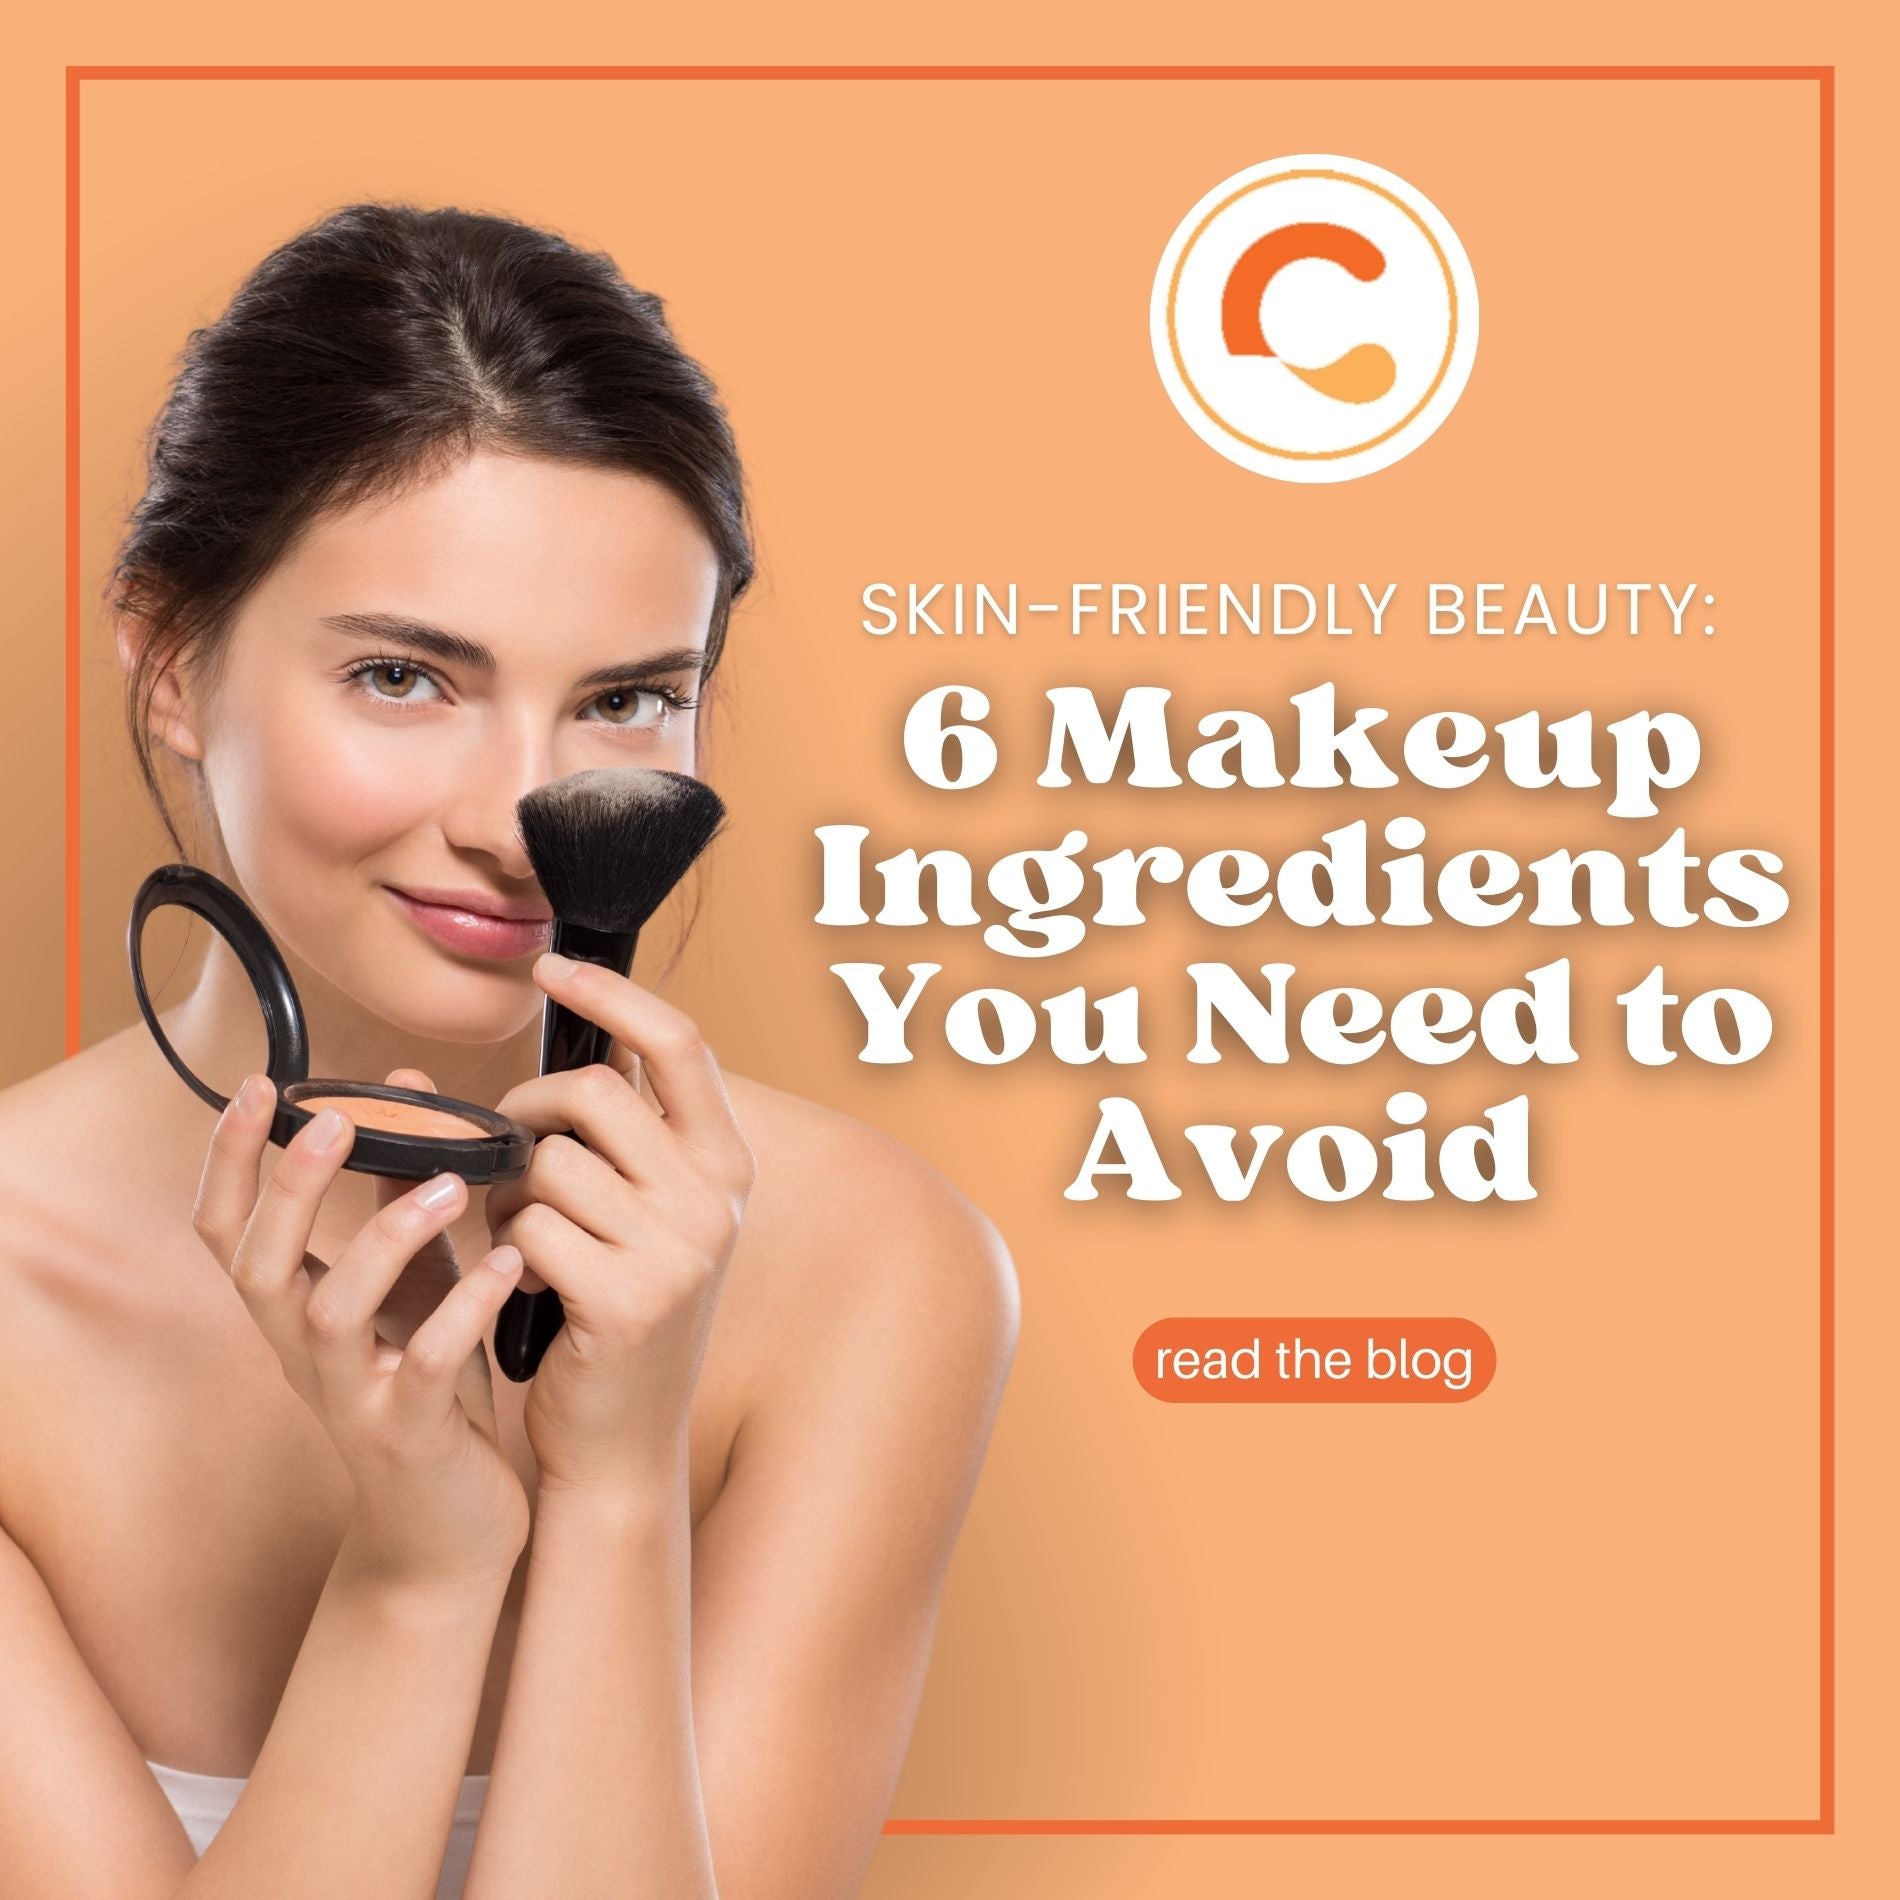 Skin-Friendly Beauty: 6 Makeup Ingredients You Need to Avoid